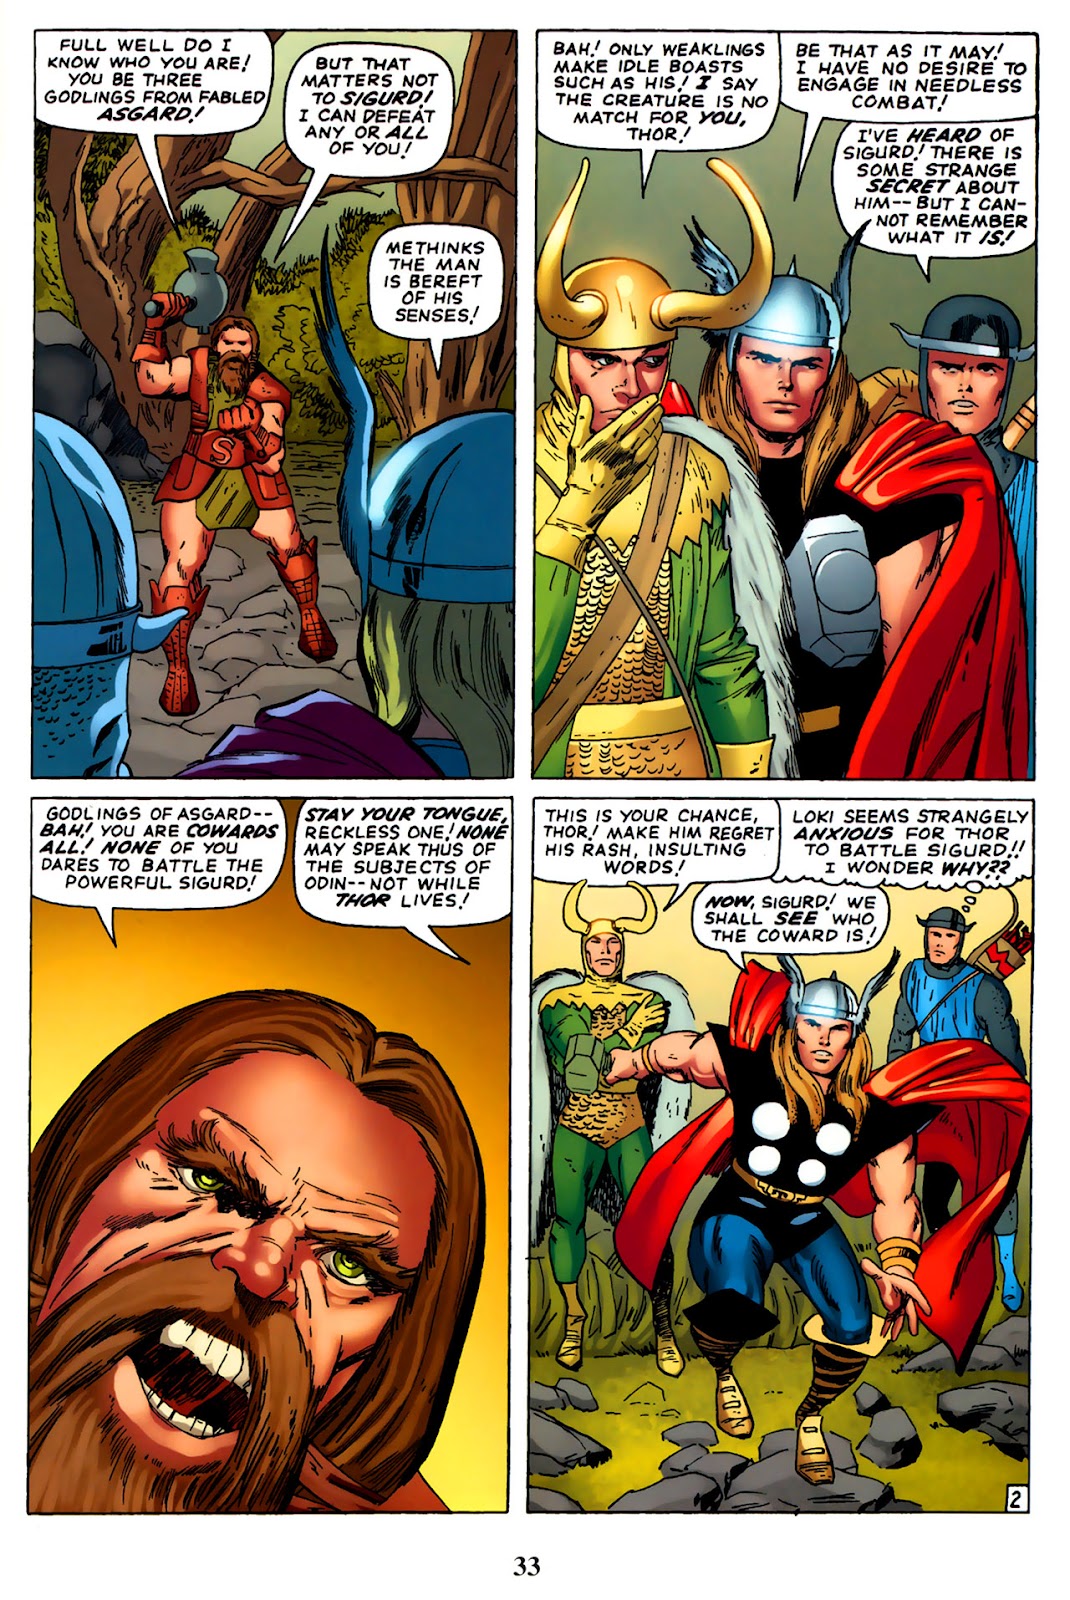 Thor: Tales of Asgard by Stan Lee & Jack Kirby issue 2 - Page 35